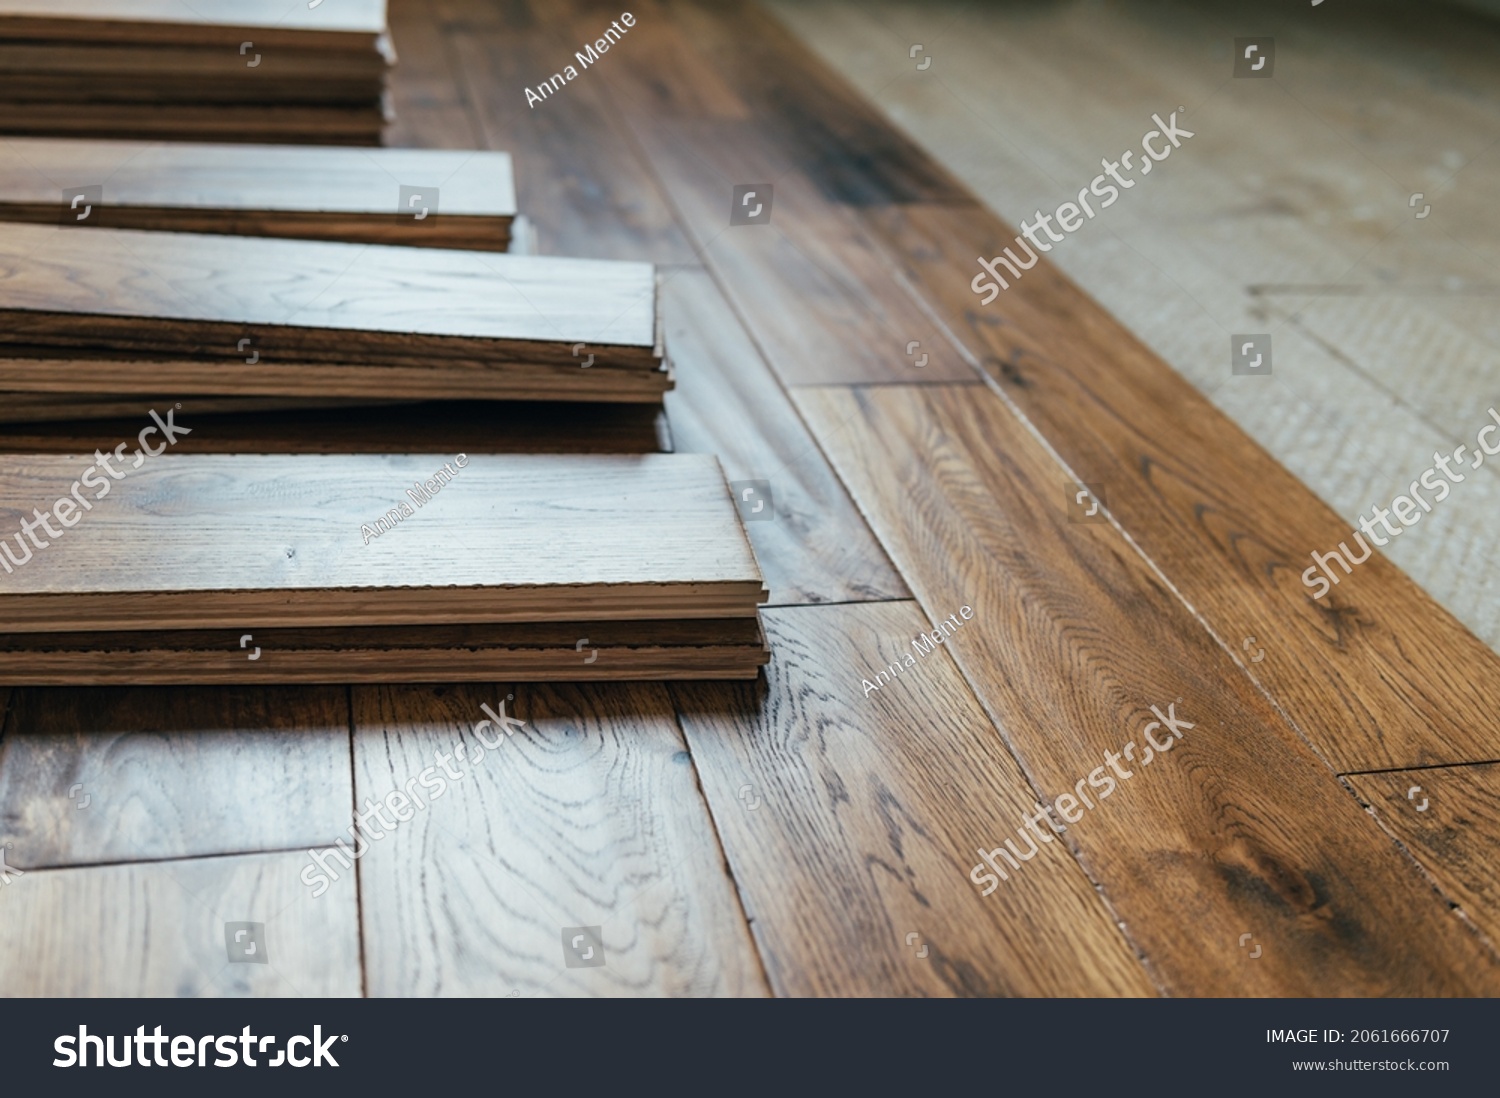 The process of house renovation with changing of the floor from carpets to solid oak wood. Beautiful golden handscraped oiled European oak brushed for added texture and fine definition of wood grain #2061666707